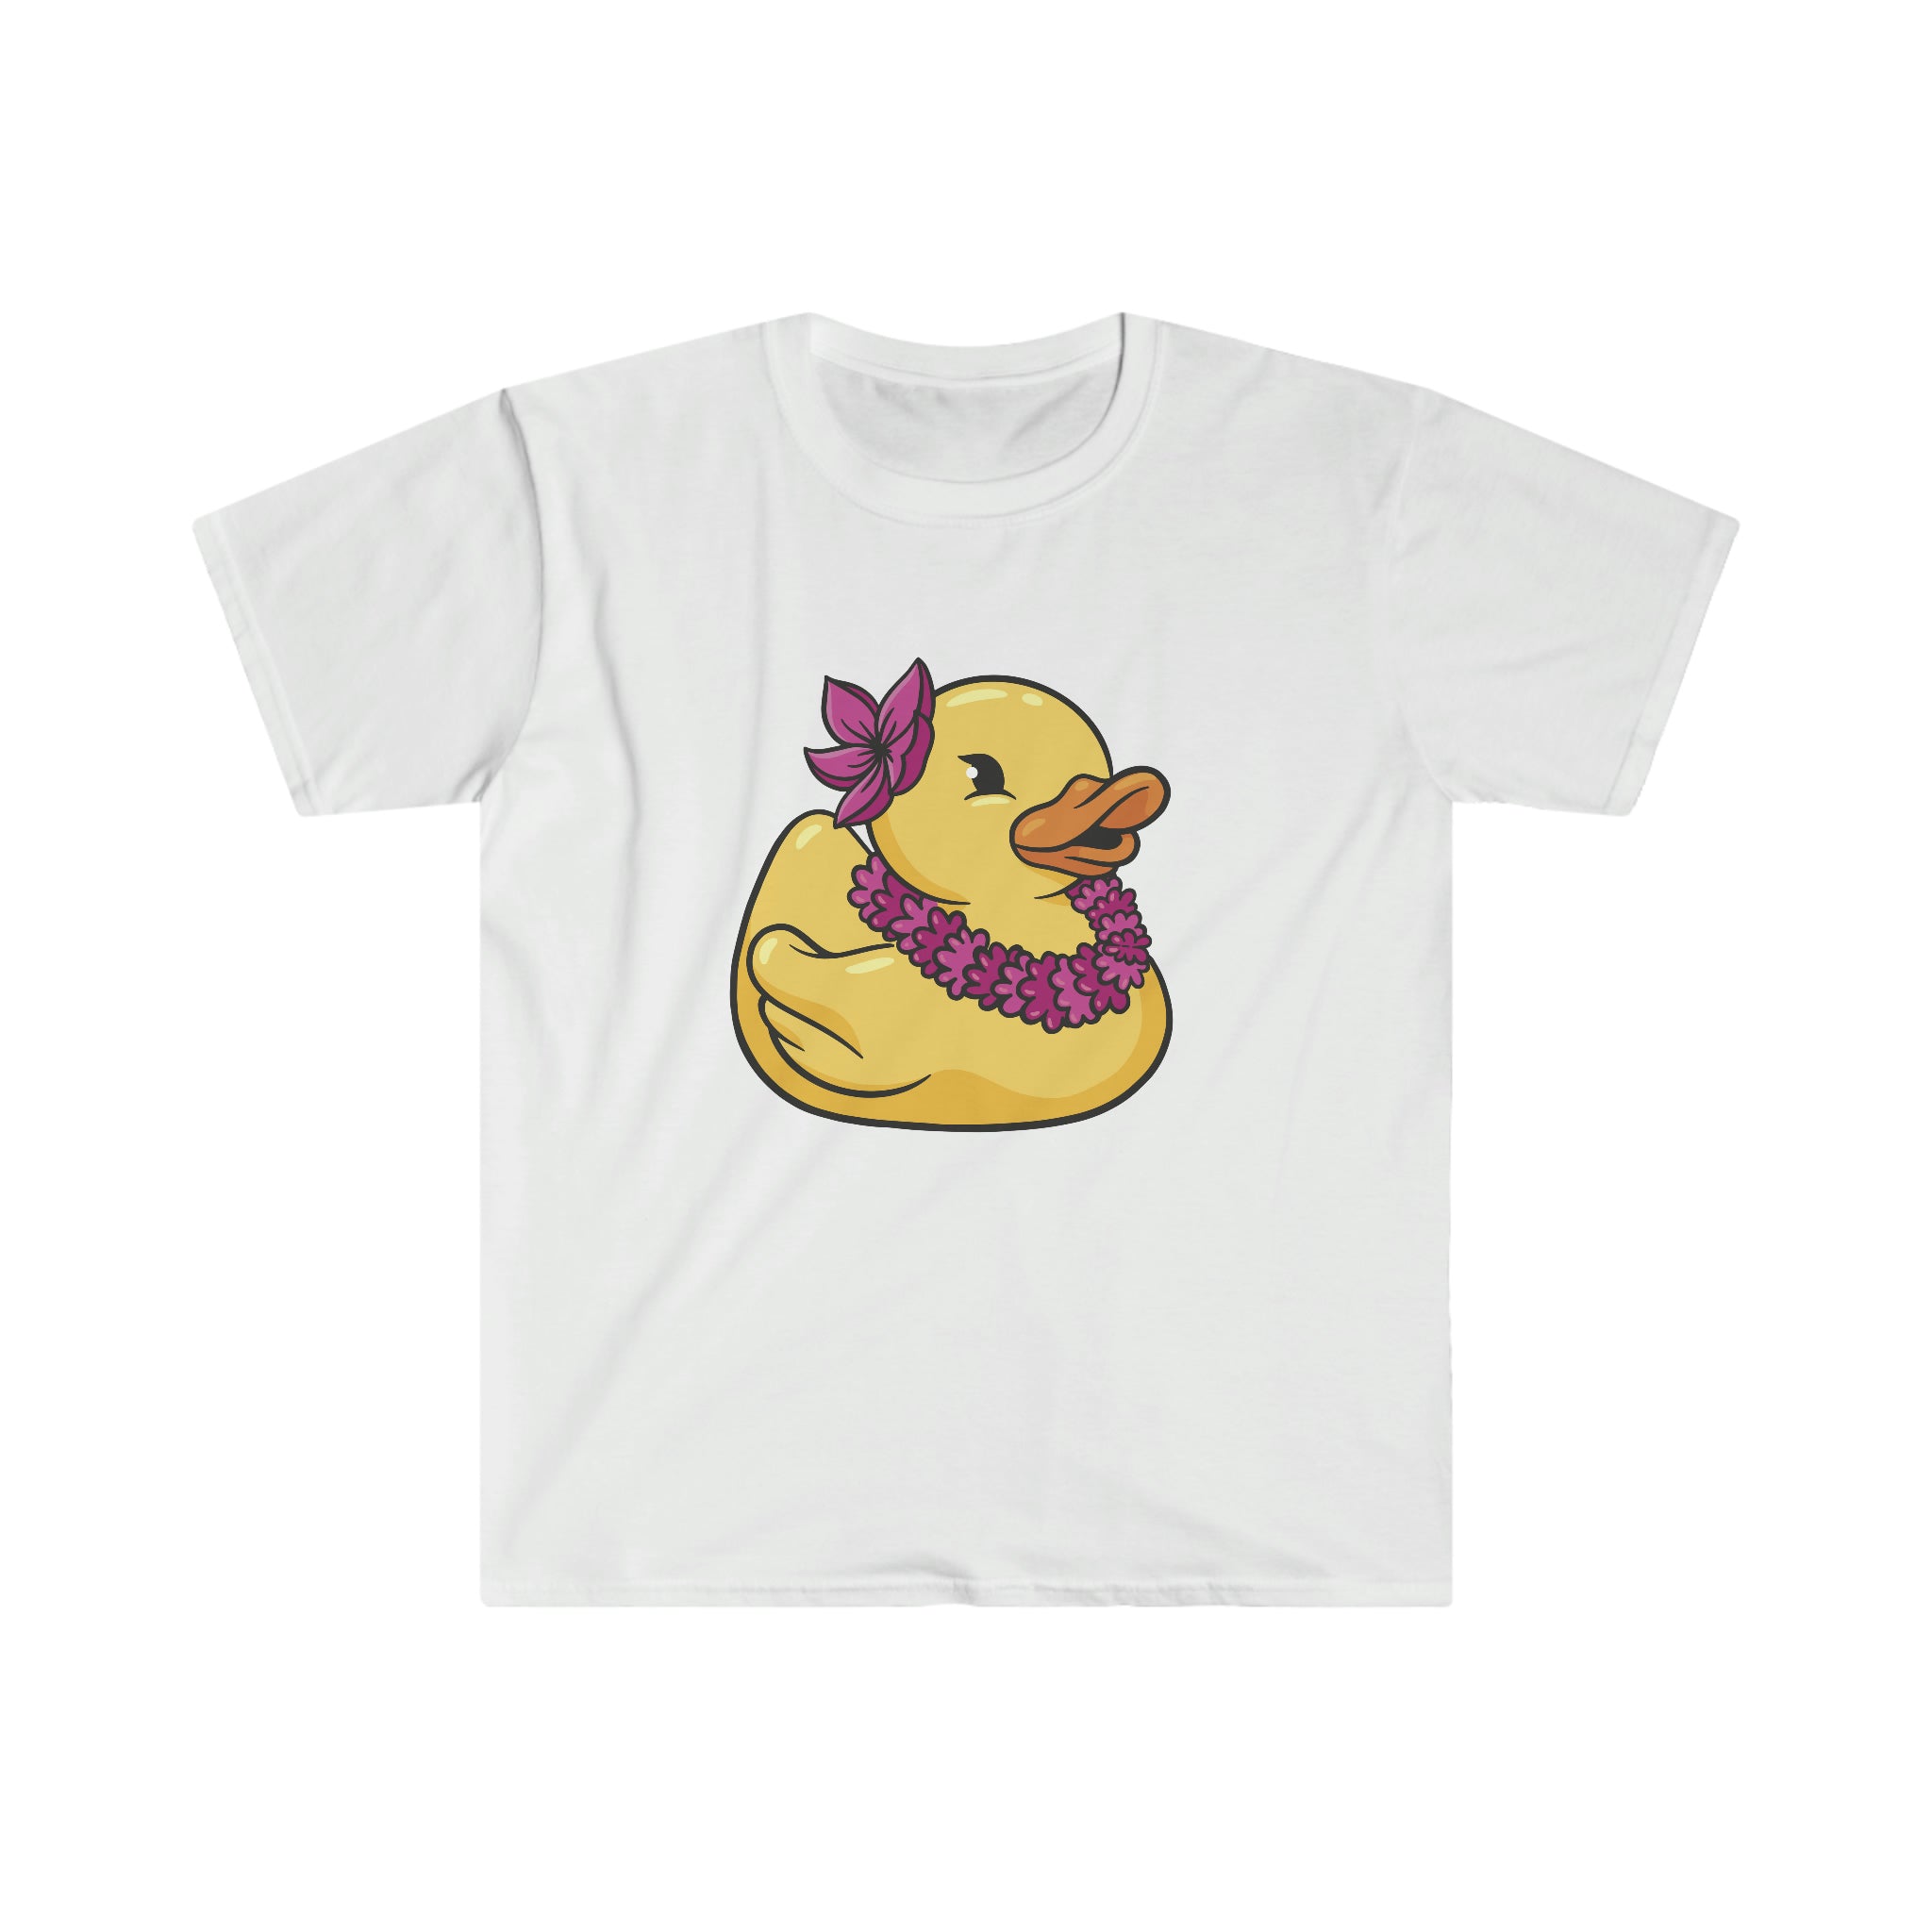 A white tee with a Going to Vacation Duck T-Shirt, perfect for the beach or vacation.